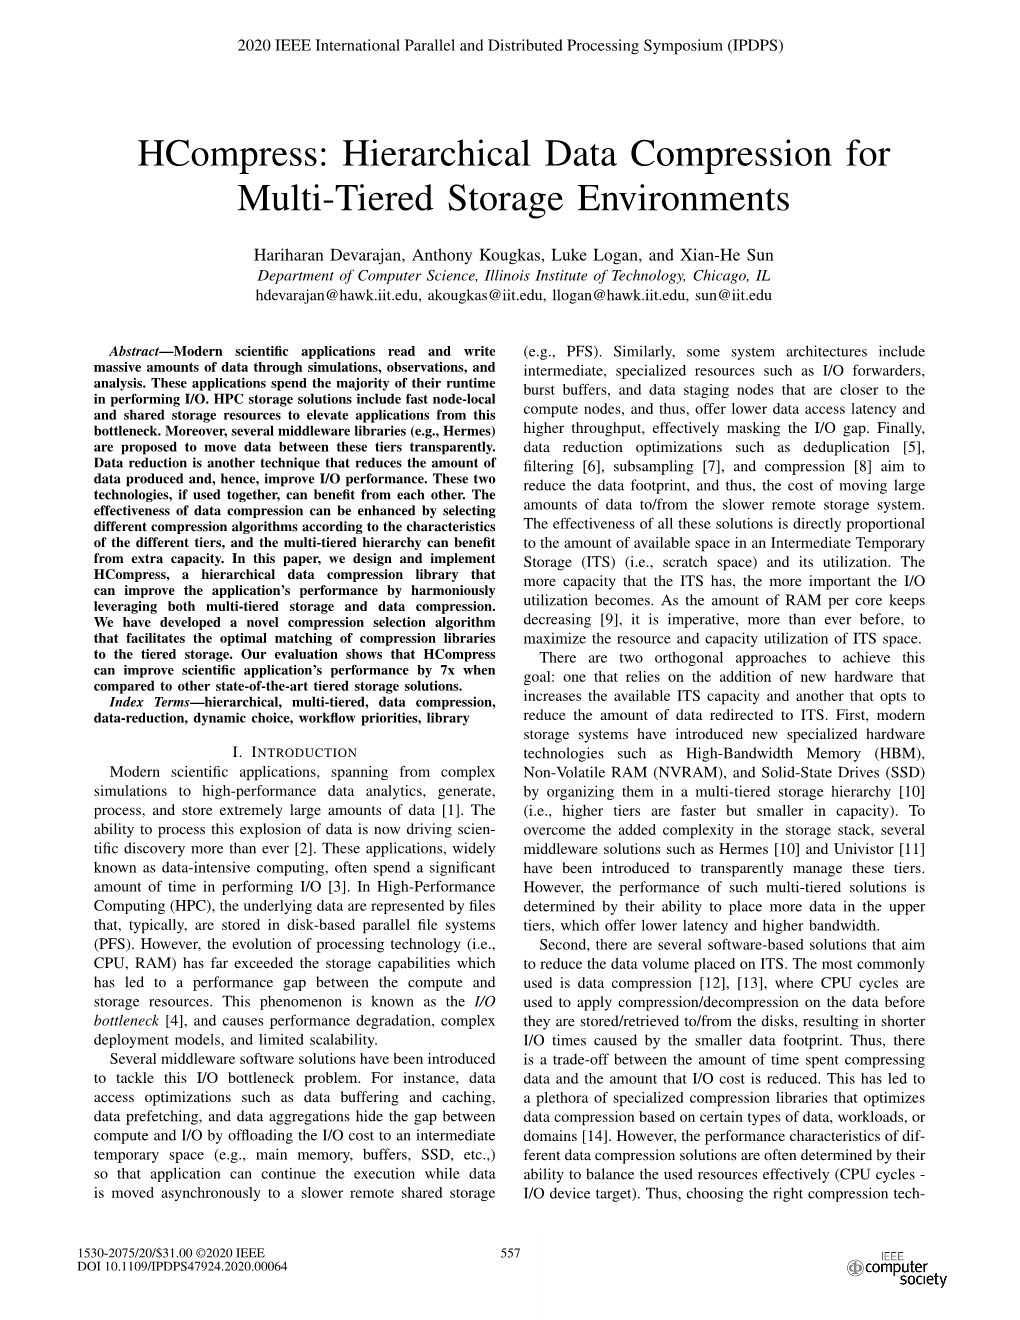 Hierarchical Data Compression for Multi-Tiered Storage Environments